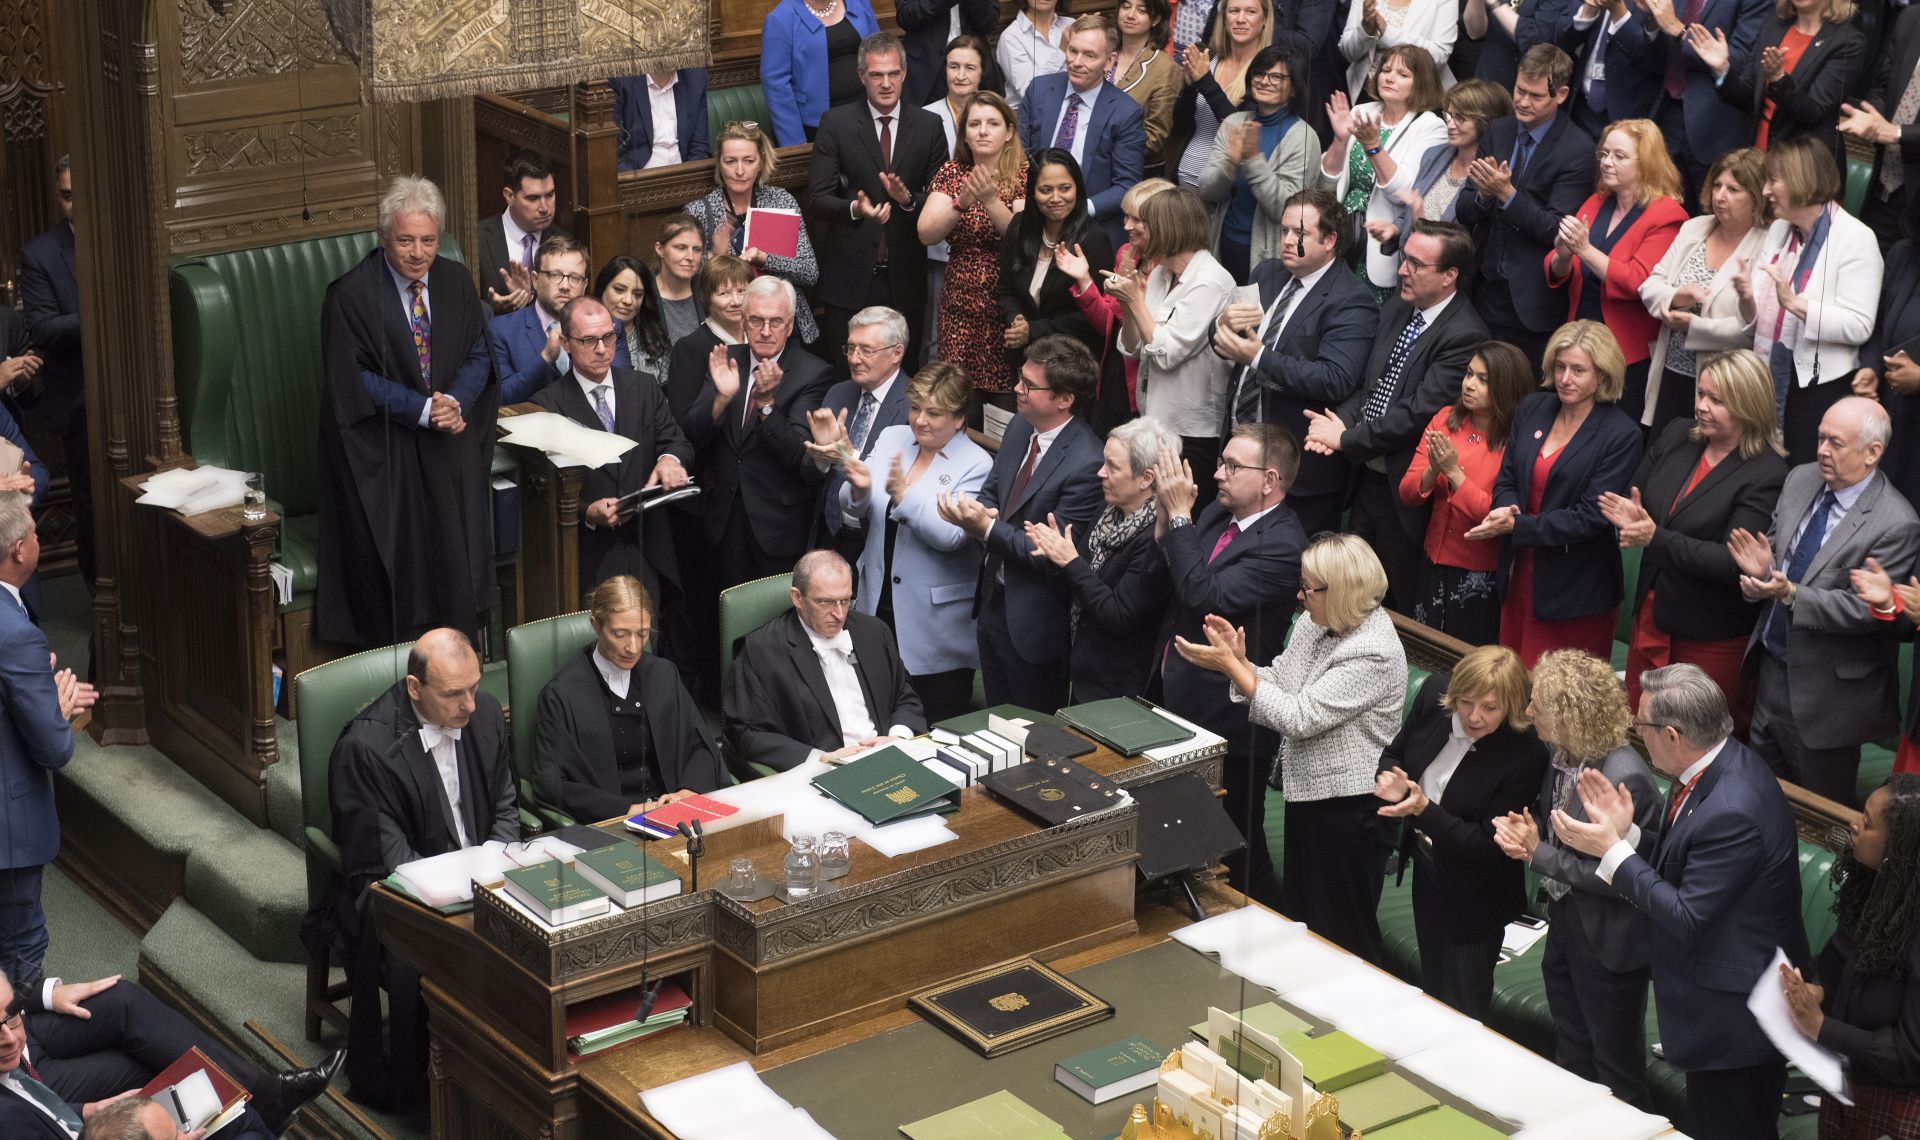 epa07830698 A handout photo made available by the UK Parliament shows Speaker of the House of Commons John Bercow (3-L) being applauded in the House of Commons in London, Britain, 09 September 2019. Reports state that John Bercow says he will stand down as Commons Speaker and Member of Parliament at the next election or on 31 October 2019, whichever comes first.  EPA/JESSICA TAYLOR/UK PARLIAMENT / HANDOUT MANDATORY CREDIT: UK PARLIAMENT / JESSICA TAYLOR HANDOUT EDITORIAL USE ONLY/NO SALES